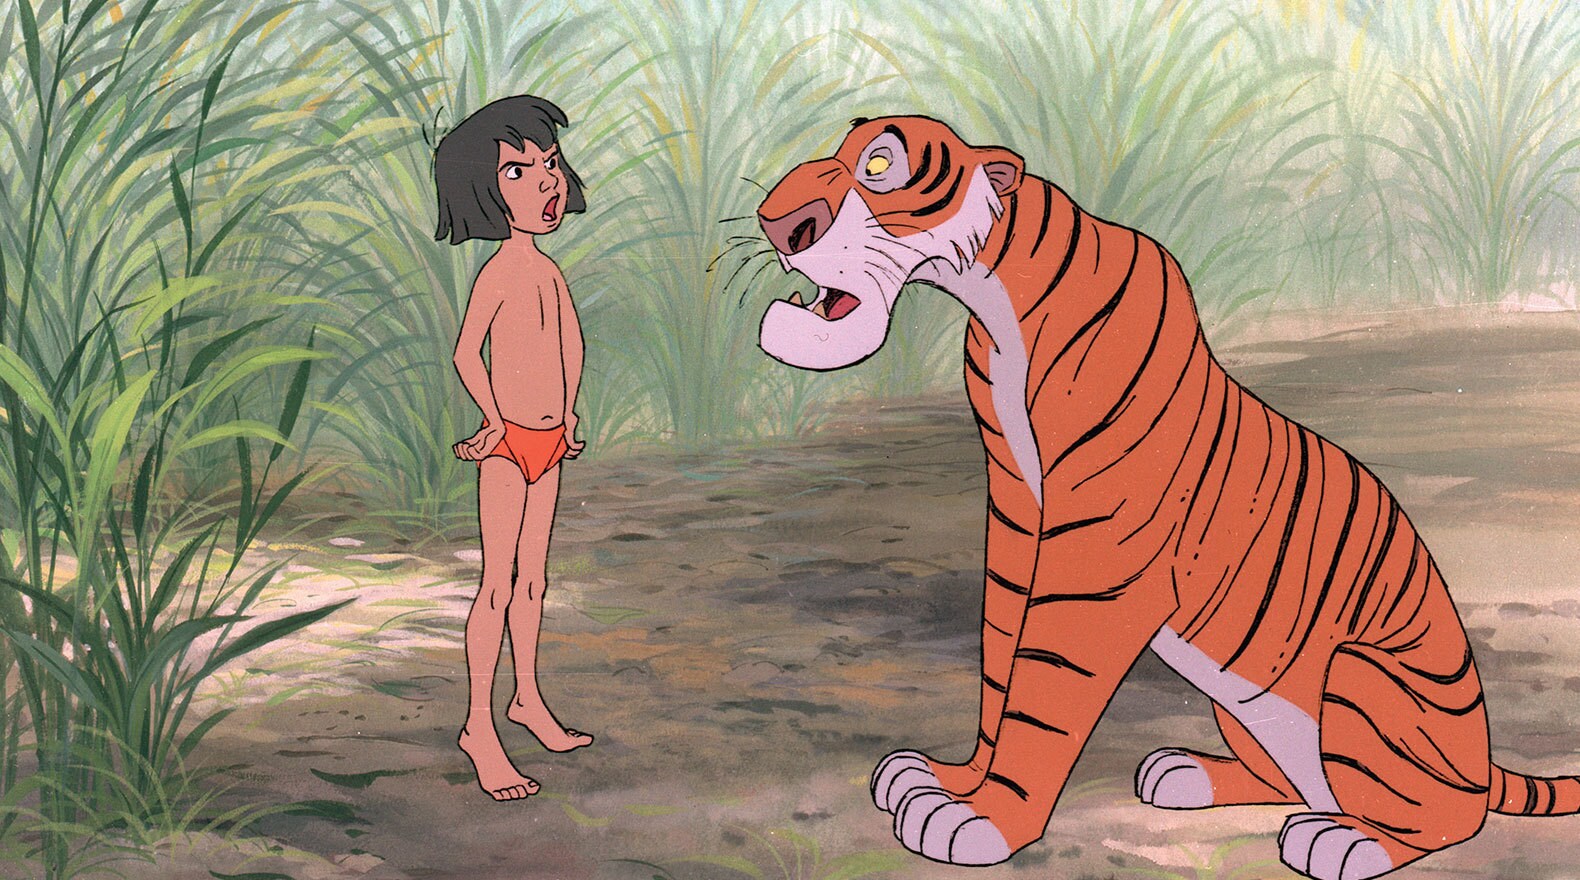 "You don't scare me. I won't run from anyone." Mowgli (voice of Bruce Reitherman) and Shere Khan (voice of George Sanders) from the Disney movie The Jungle Book (1967).